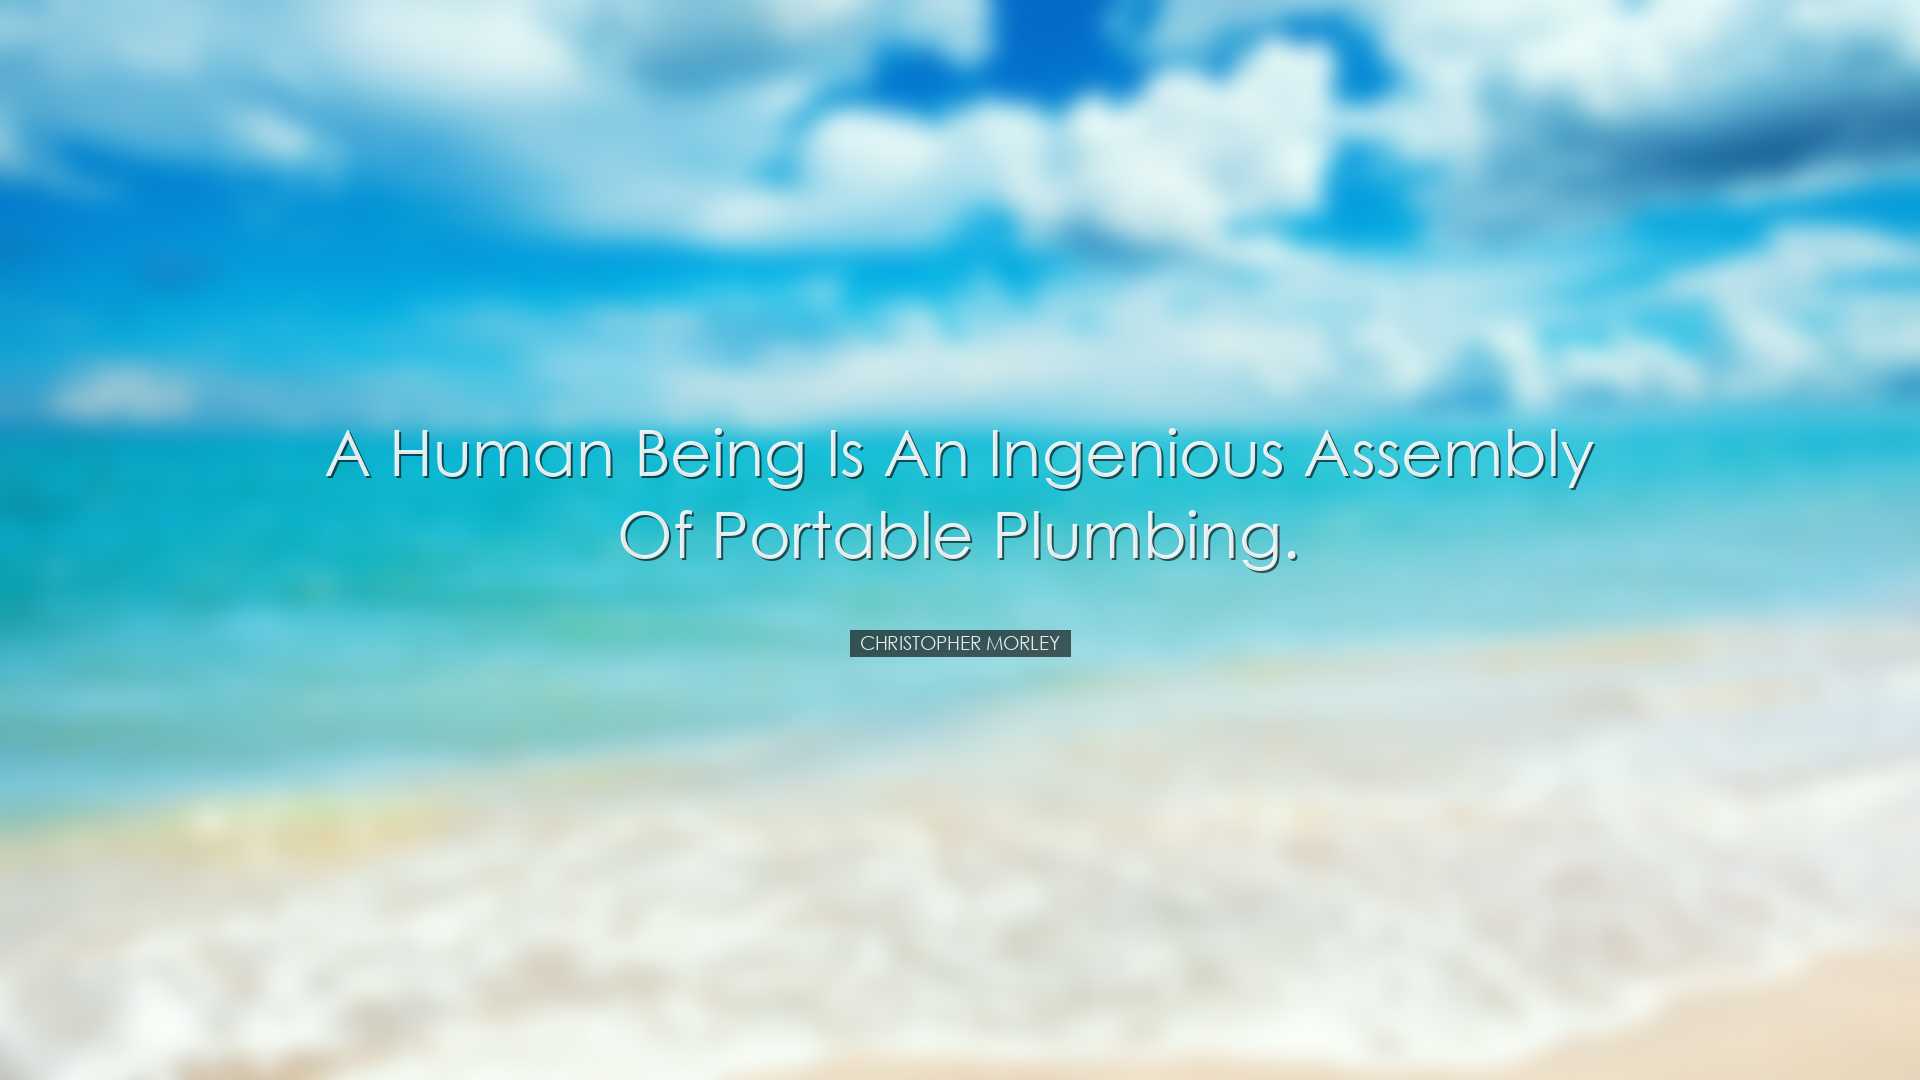 A human being is an ingenious assembly of portable plumbing. - Chr